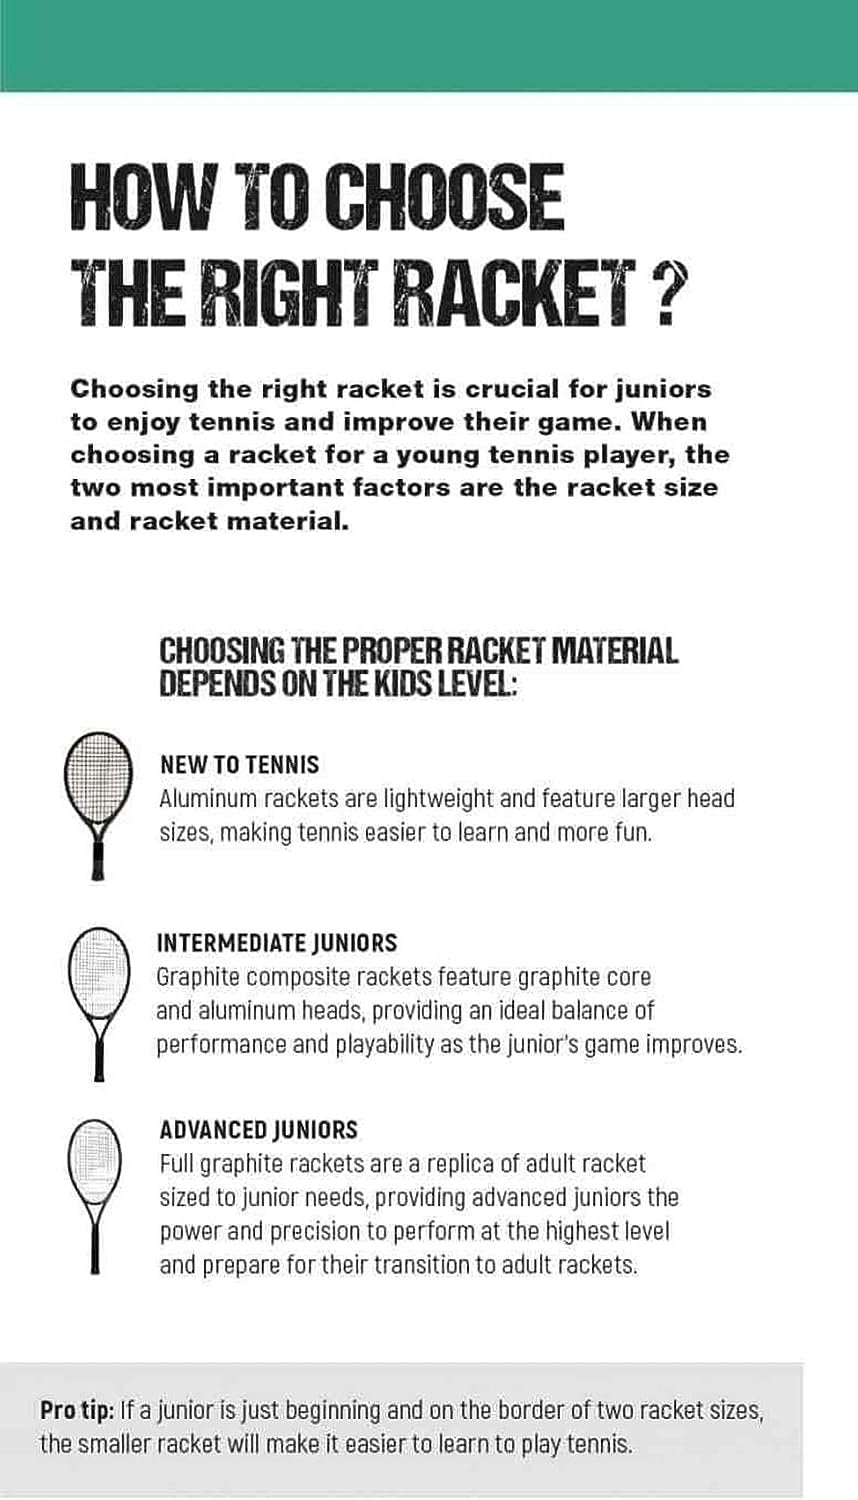 Babolat Pure Aero Junior Tennis Racquet Bundled with a Club Bag or Backpack